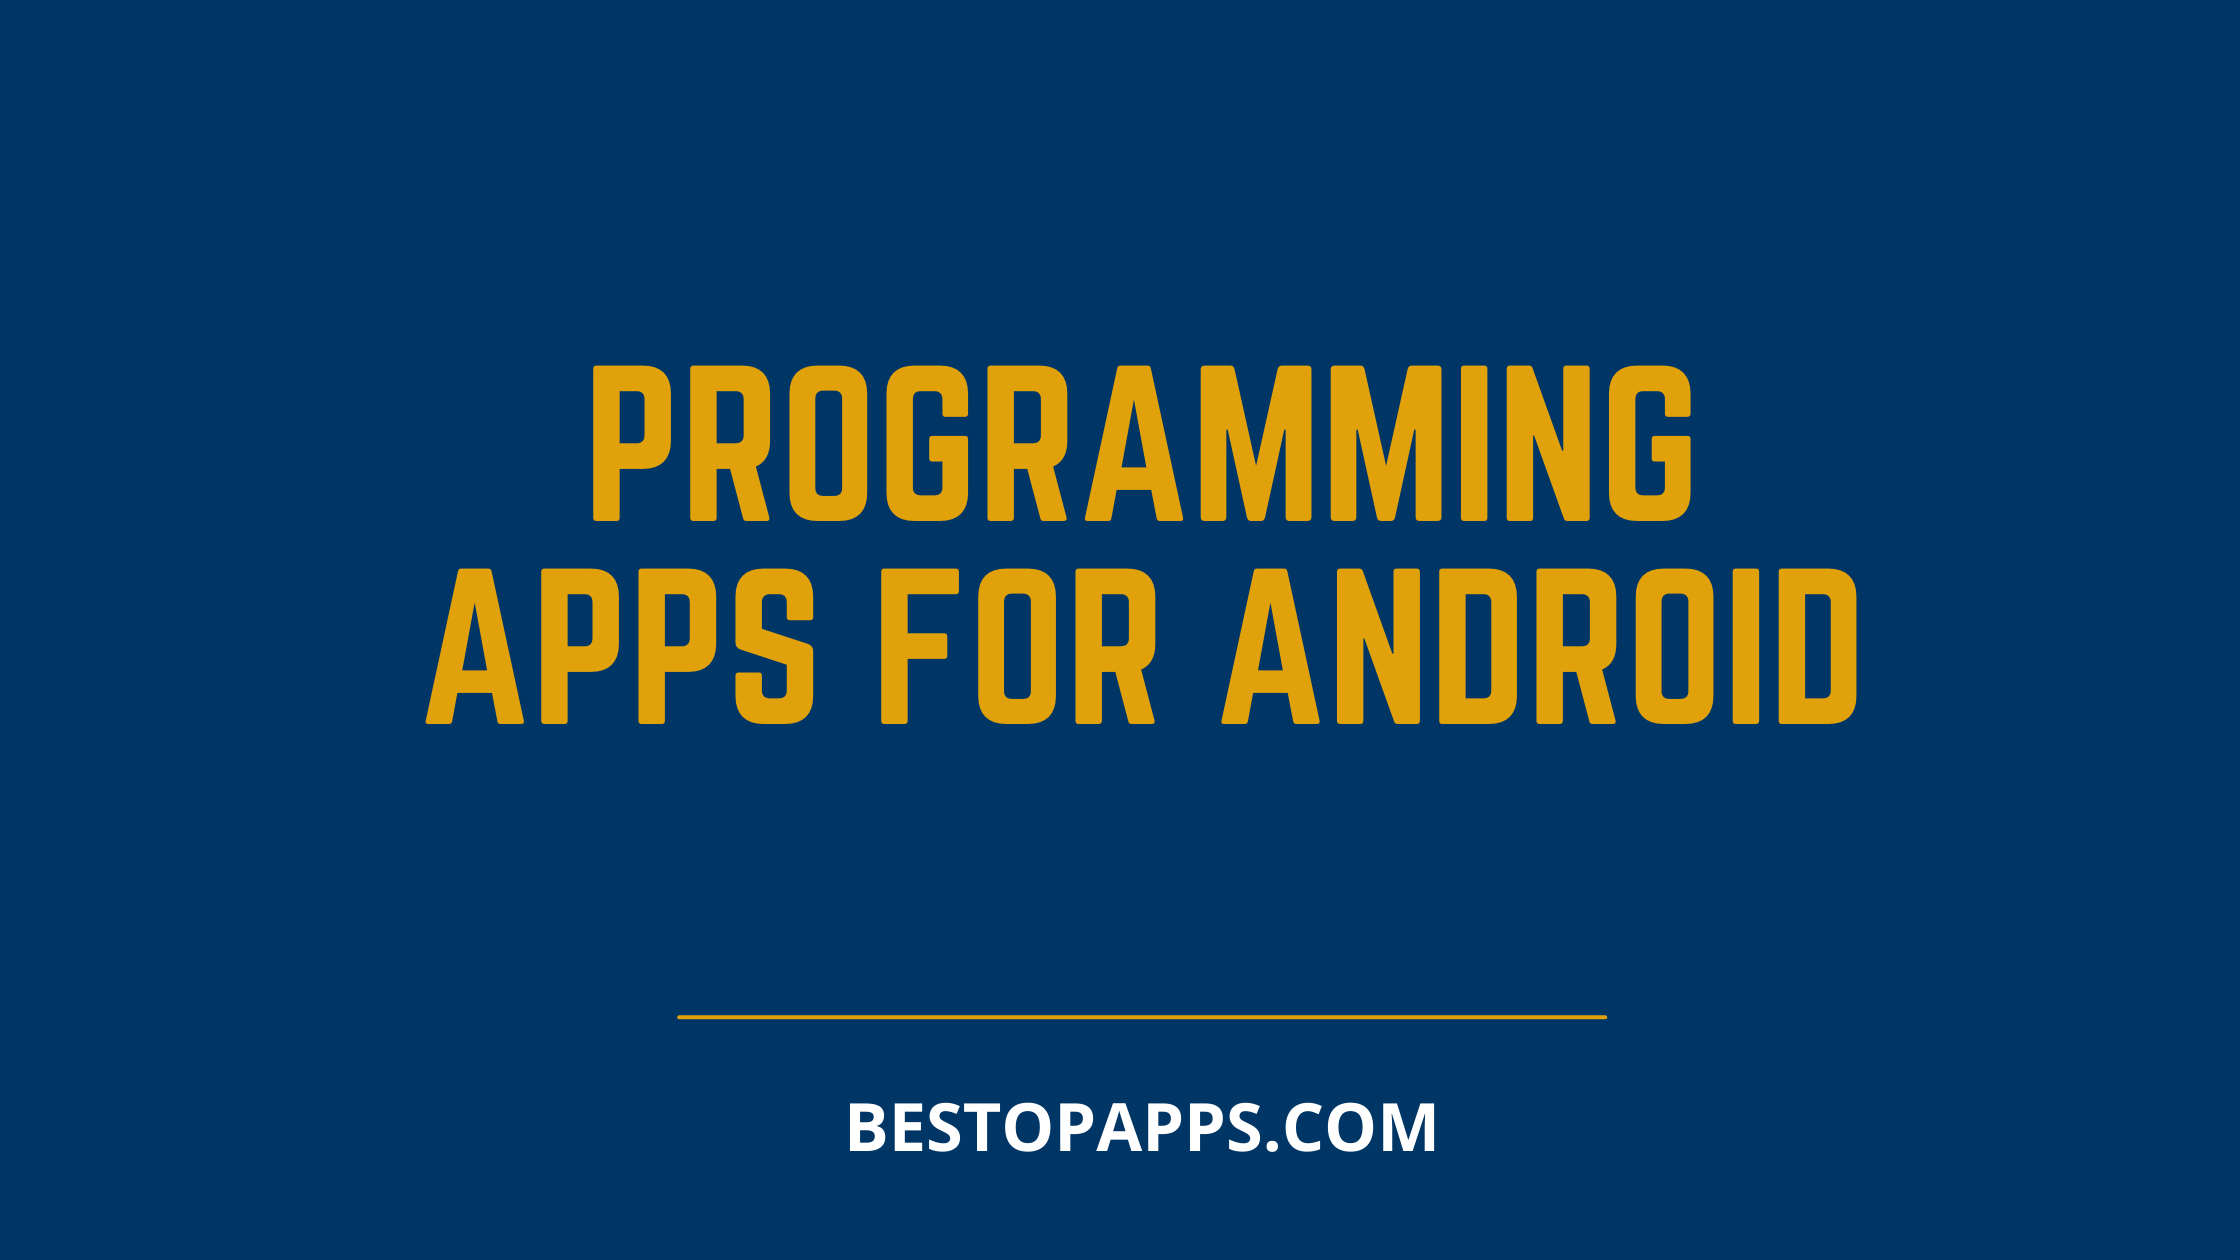 PROGRAMMING APPS FOR ANDROID